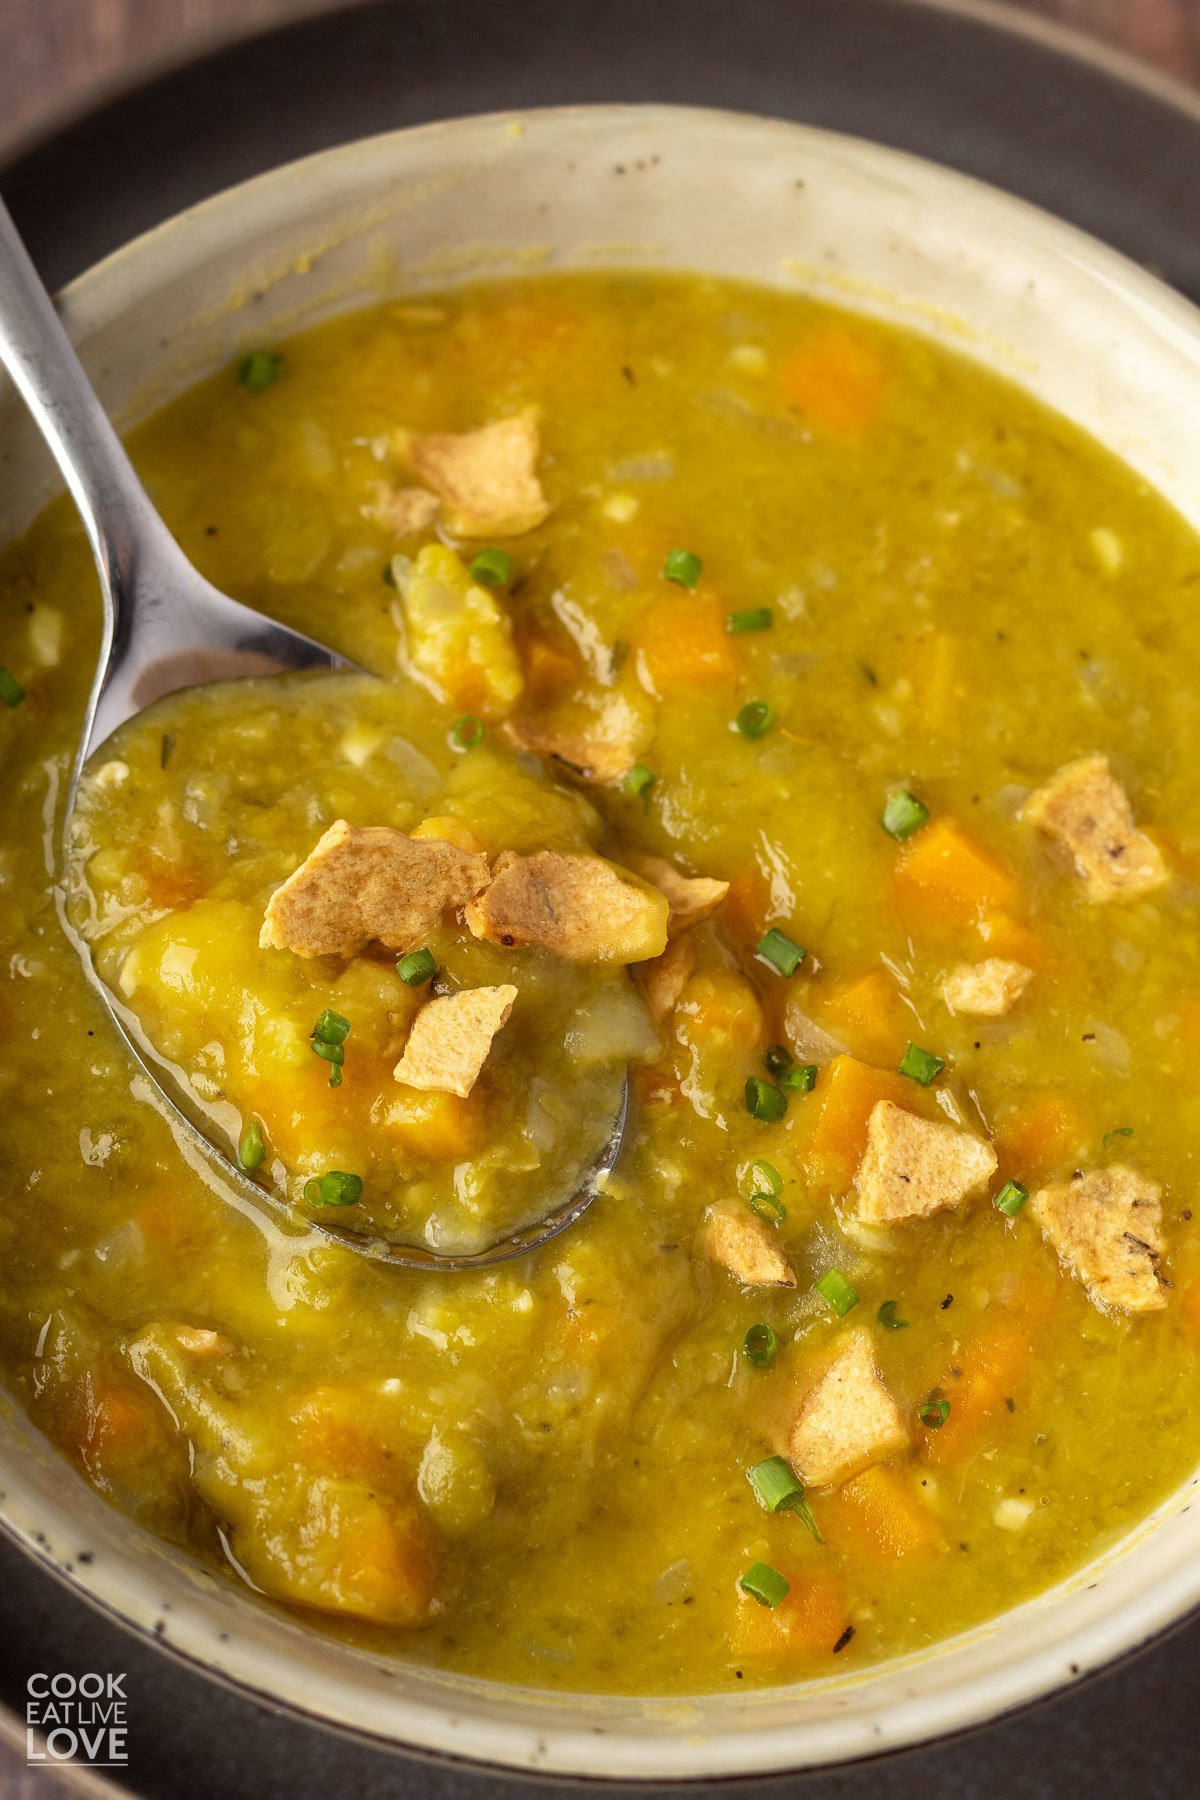 close-up of a spoonful of soup above a bowl of soup garnished with crushed cracker pieces.